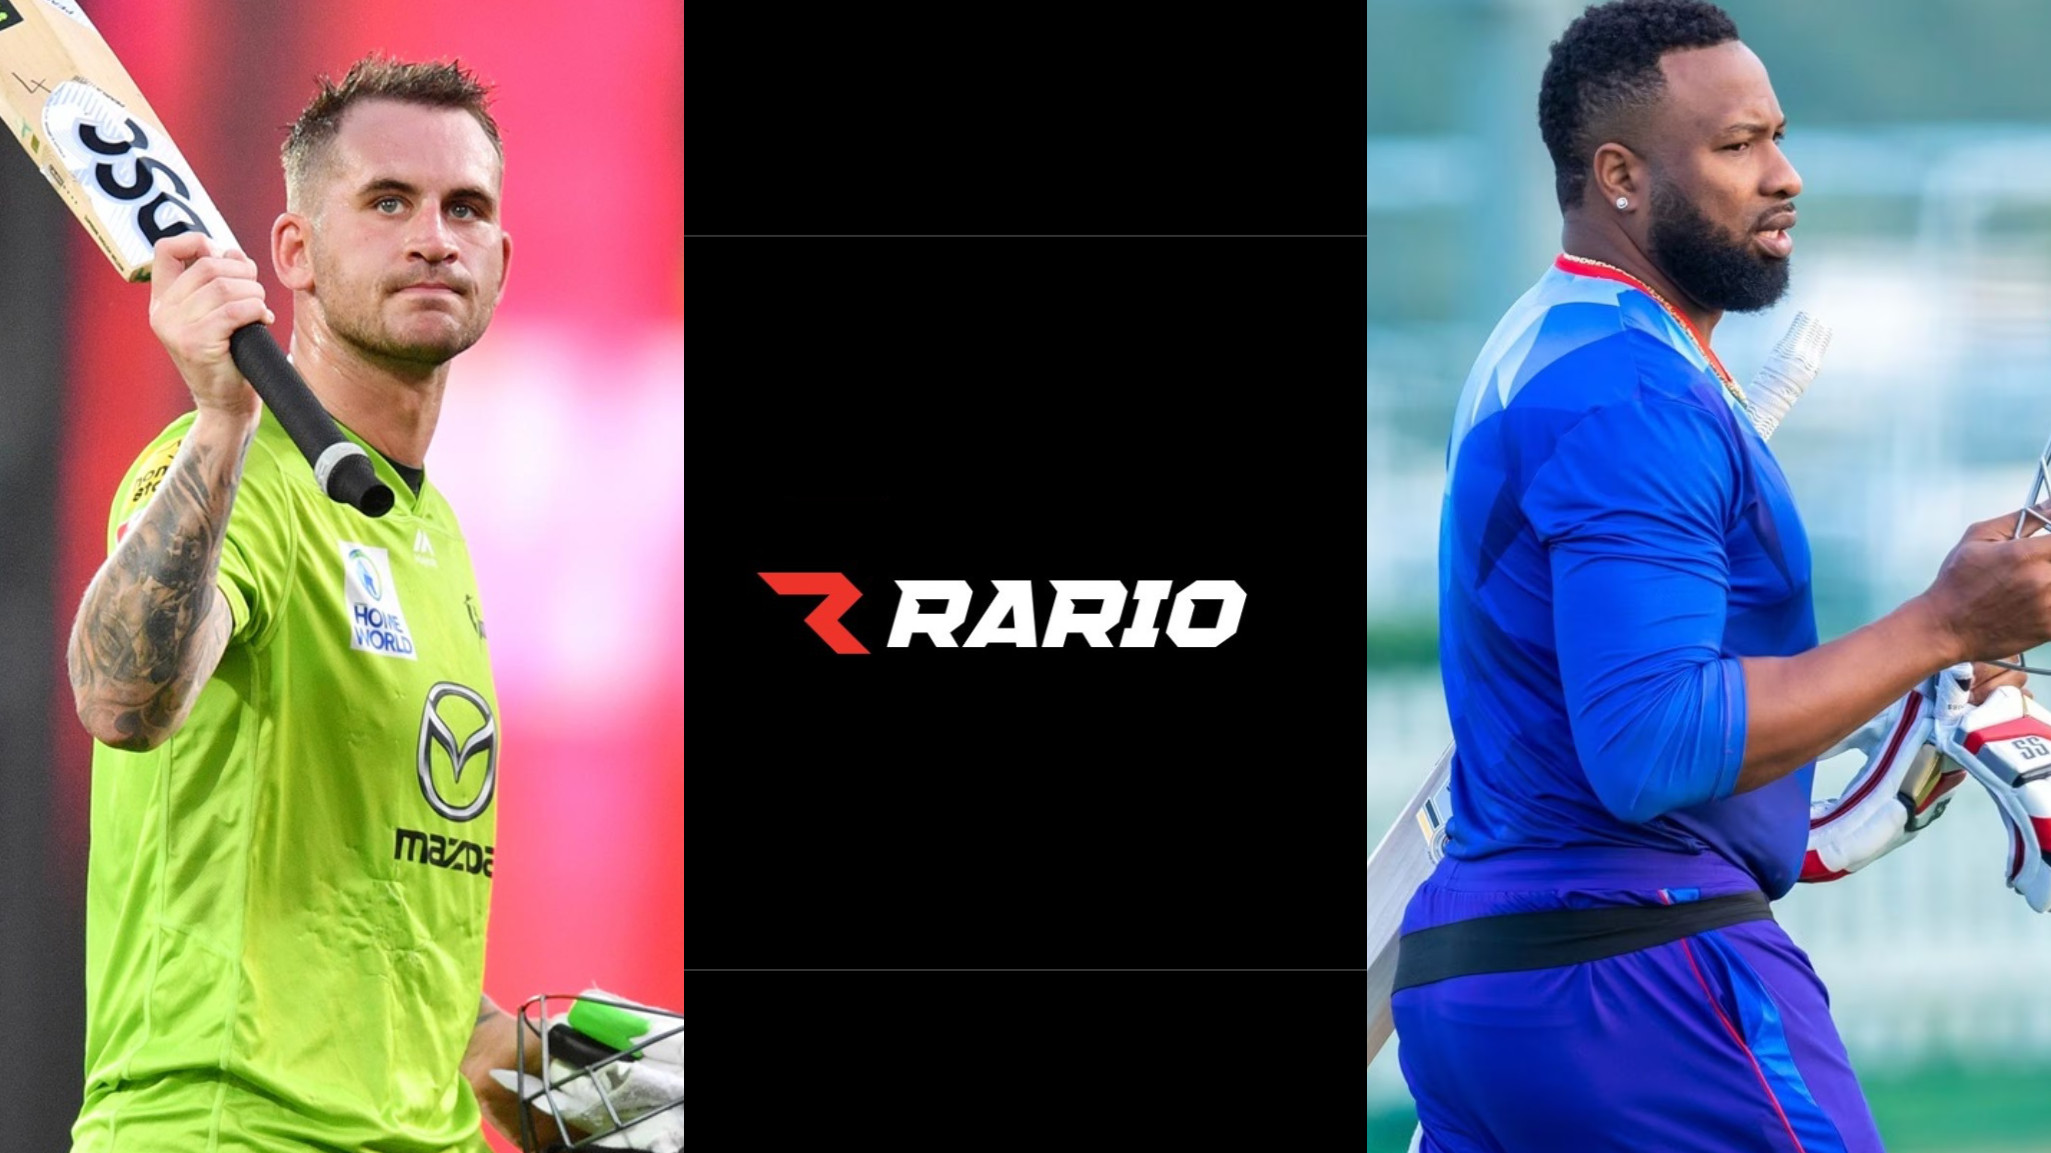 Rario D3 Predictions: Grab exciting player cards for UAE INTL T20 league and play for amazing prizes